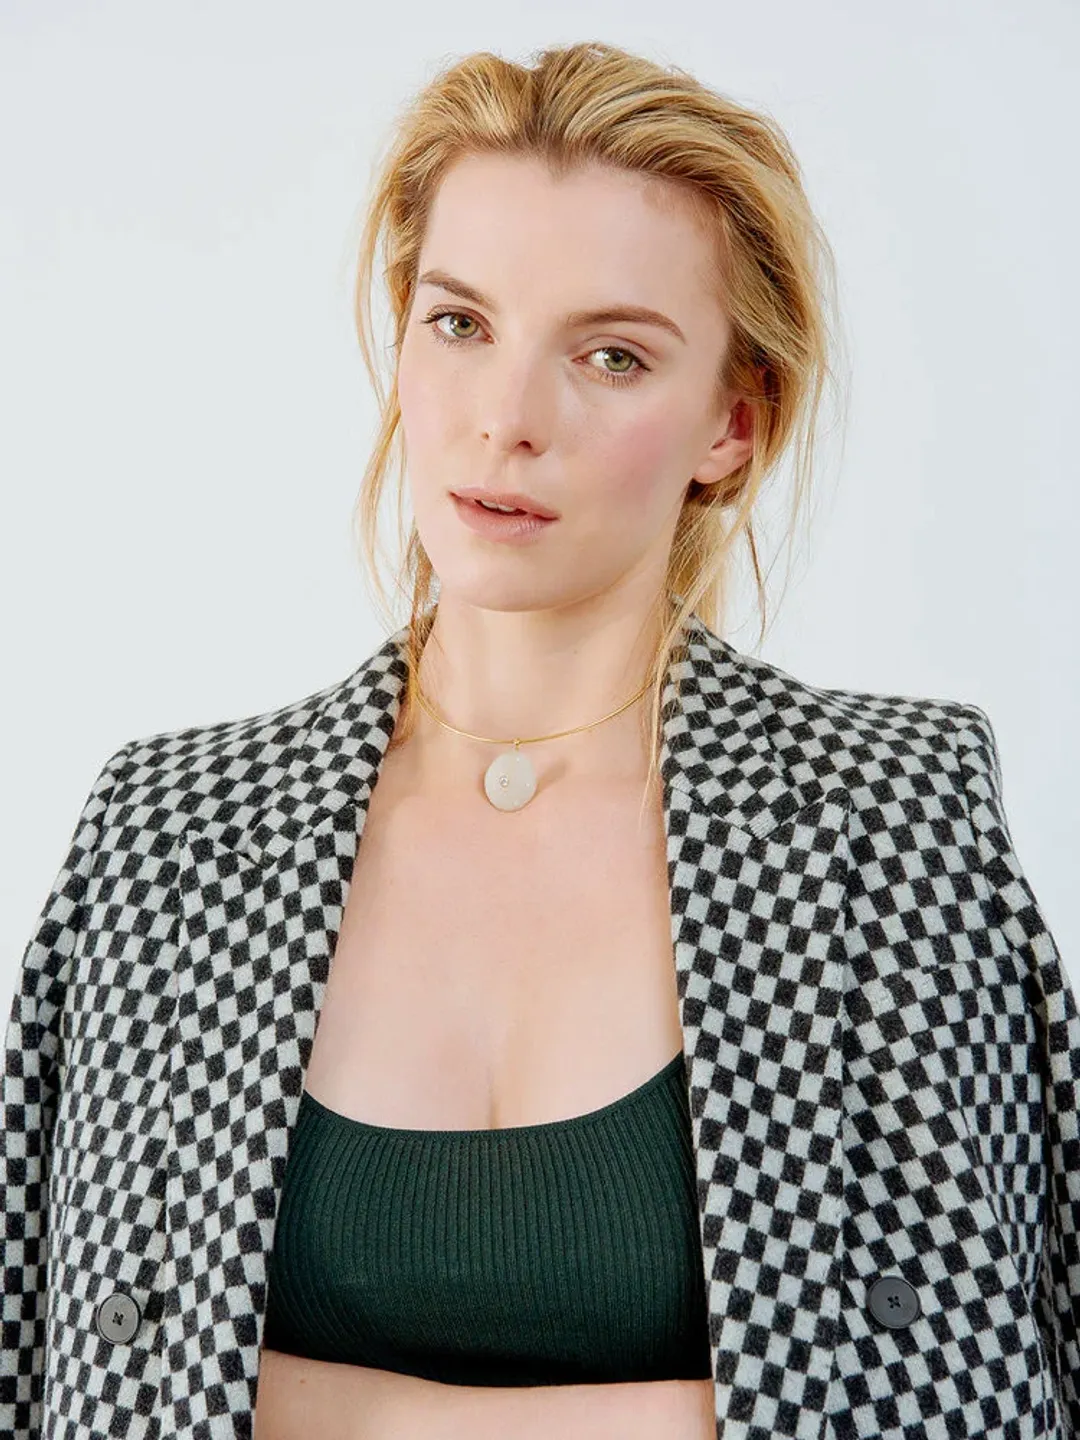 Betty Gilpin interesting facts